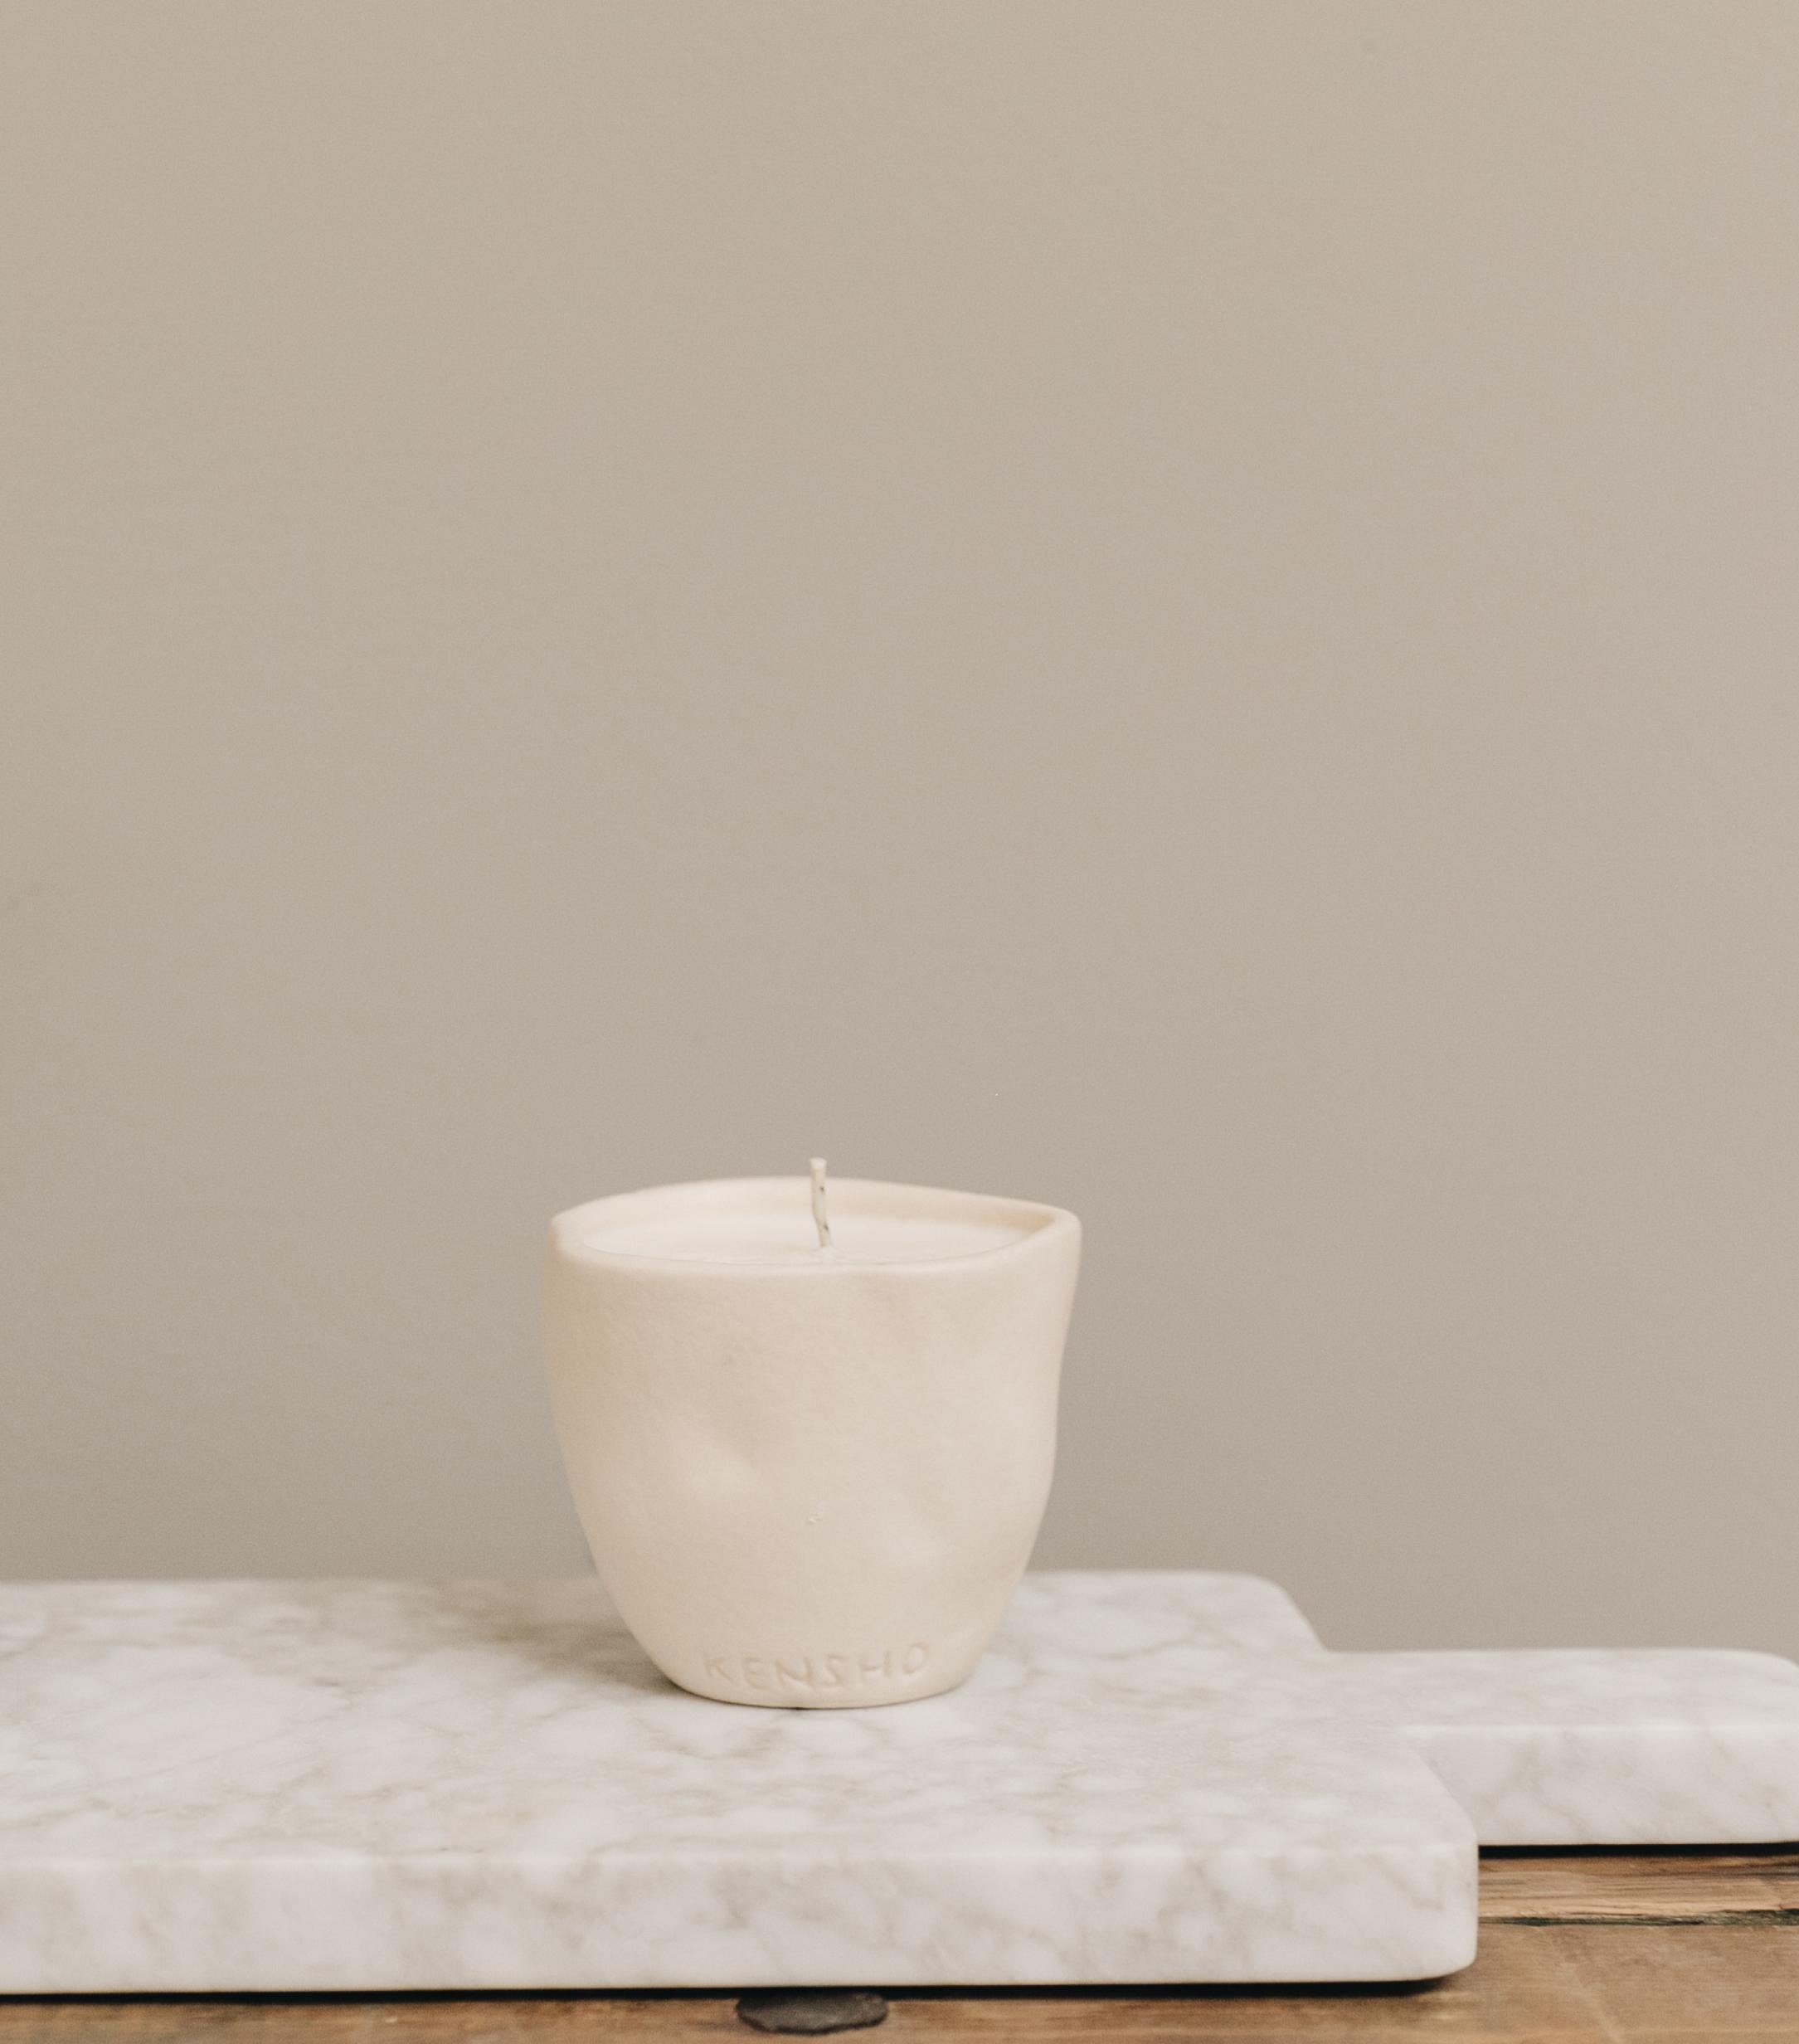 This Mexican Handmade Ceramic Soy Wax Candle is a beautifully crafted piece of art that combines traditional pottery techniques with modern eco-friendly materials. The candle is made from high-quality soy wax, which is a renewable and sustainable